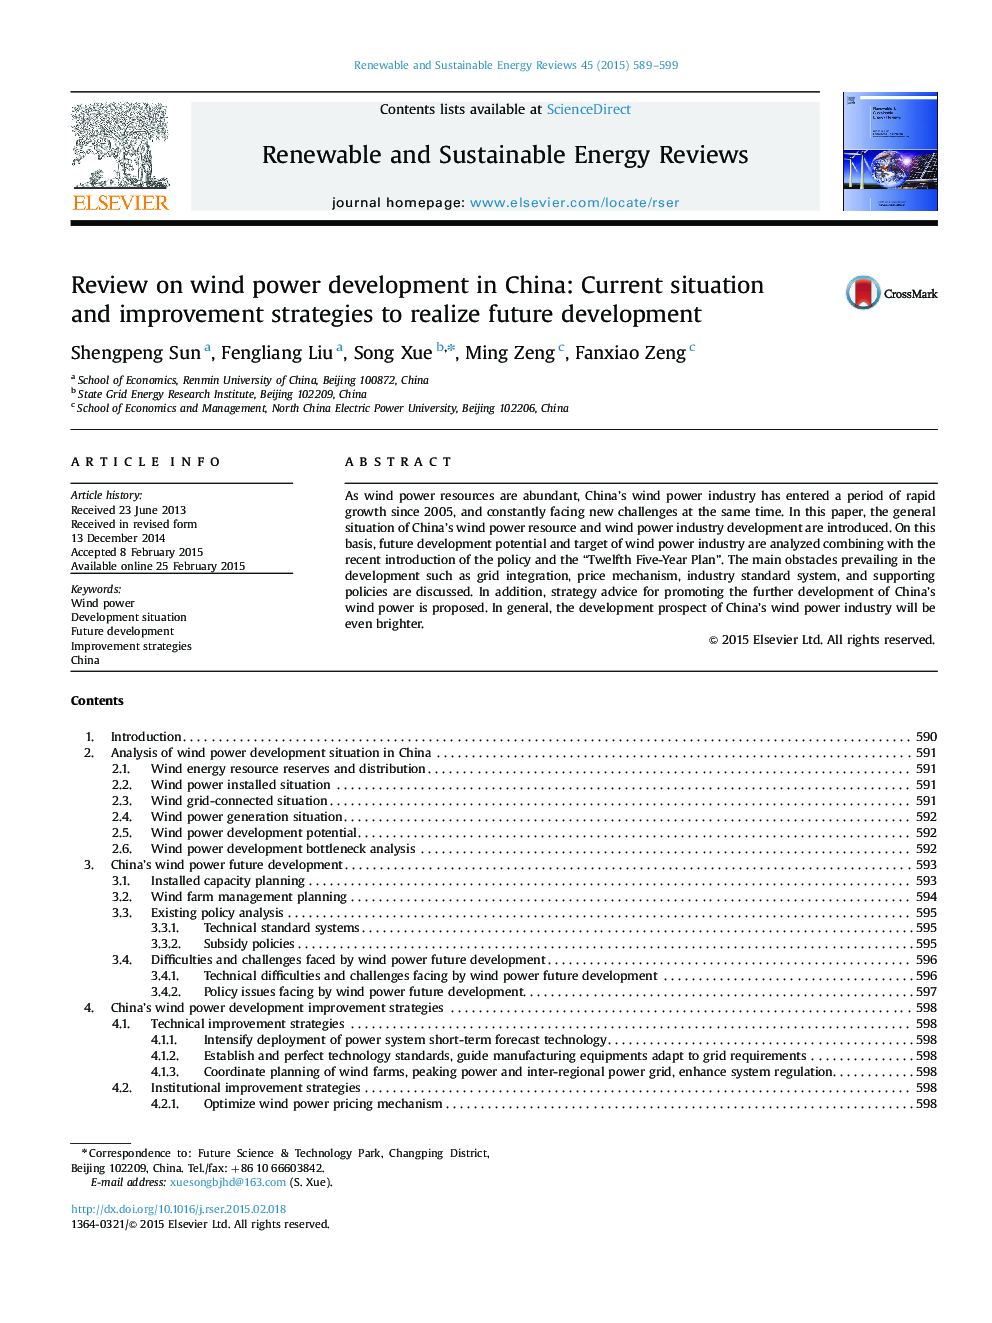 Review on wind power development in China: Current situation and improvement strategies to realize future development